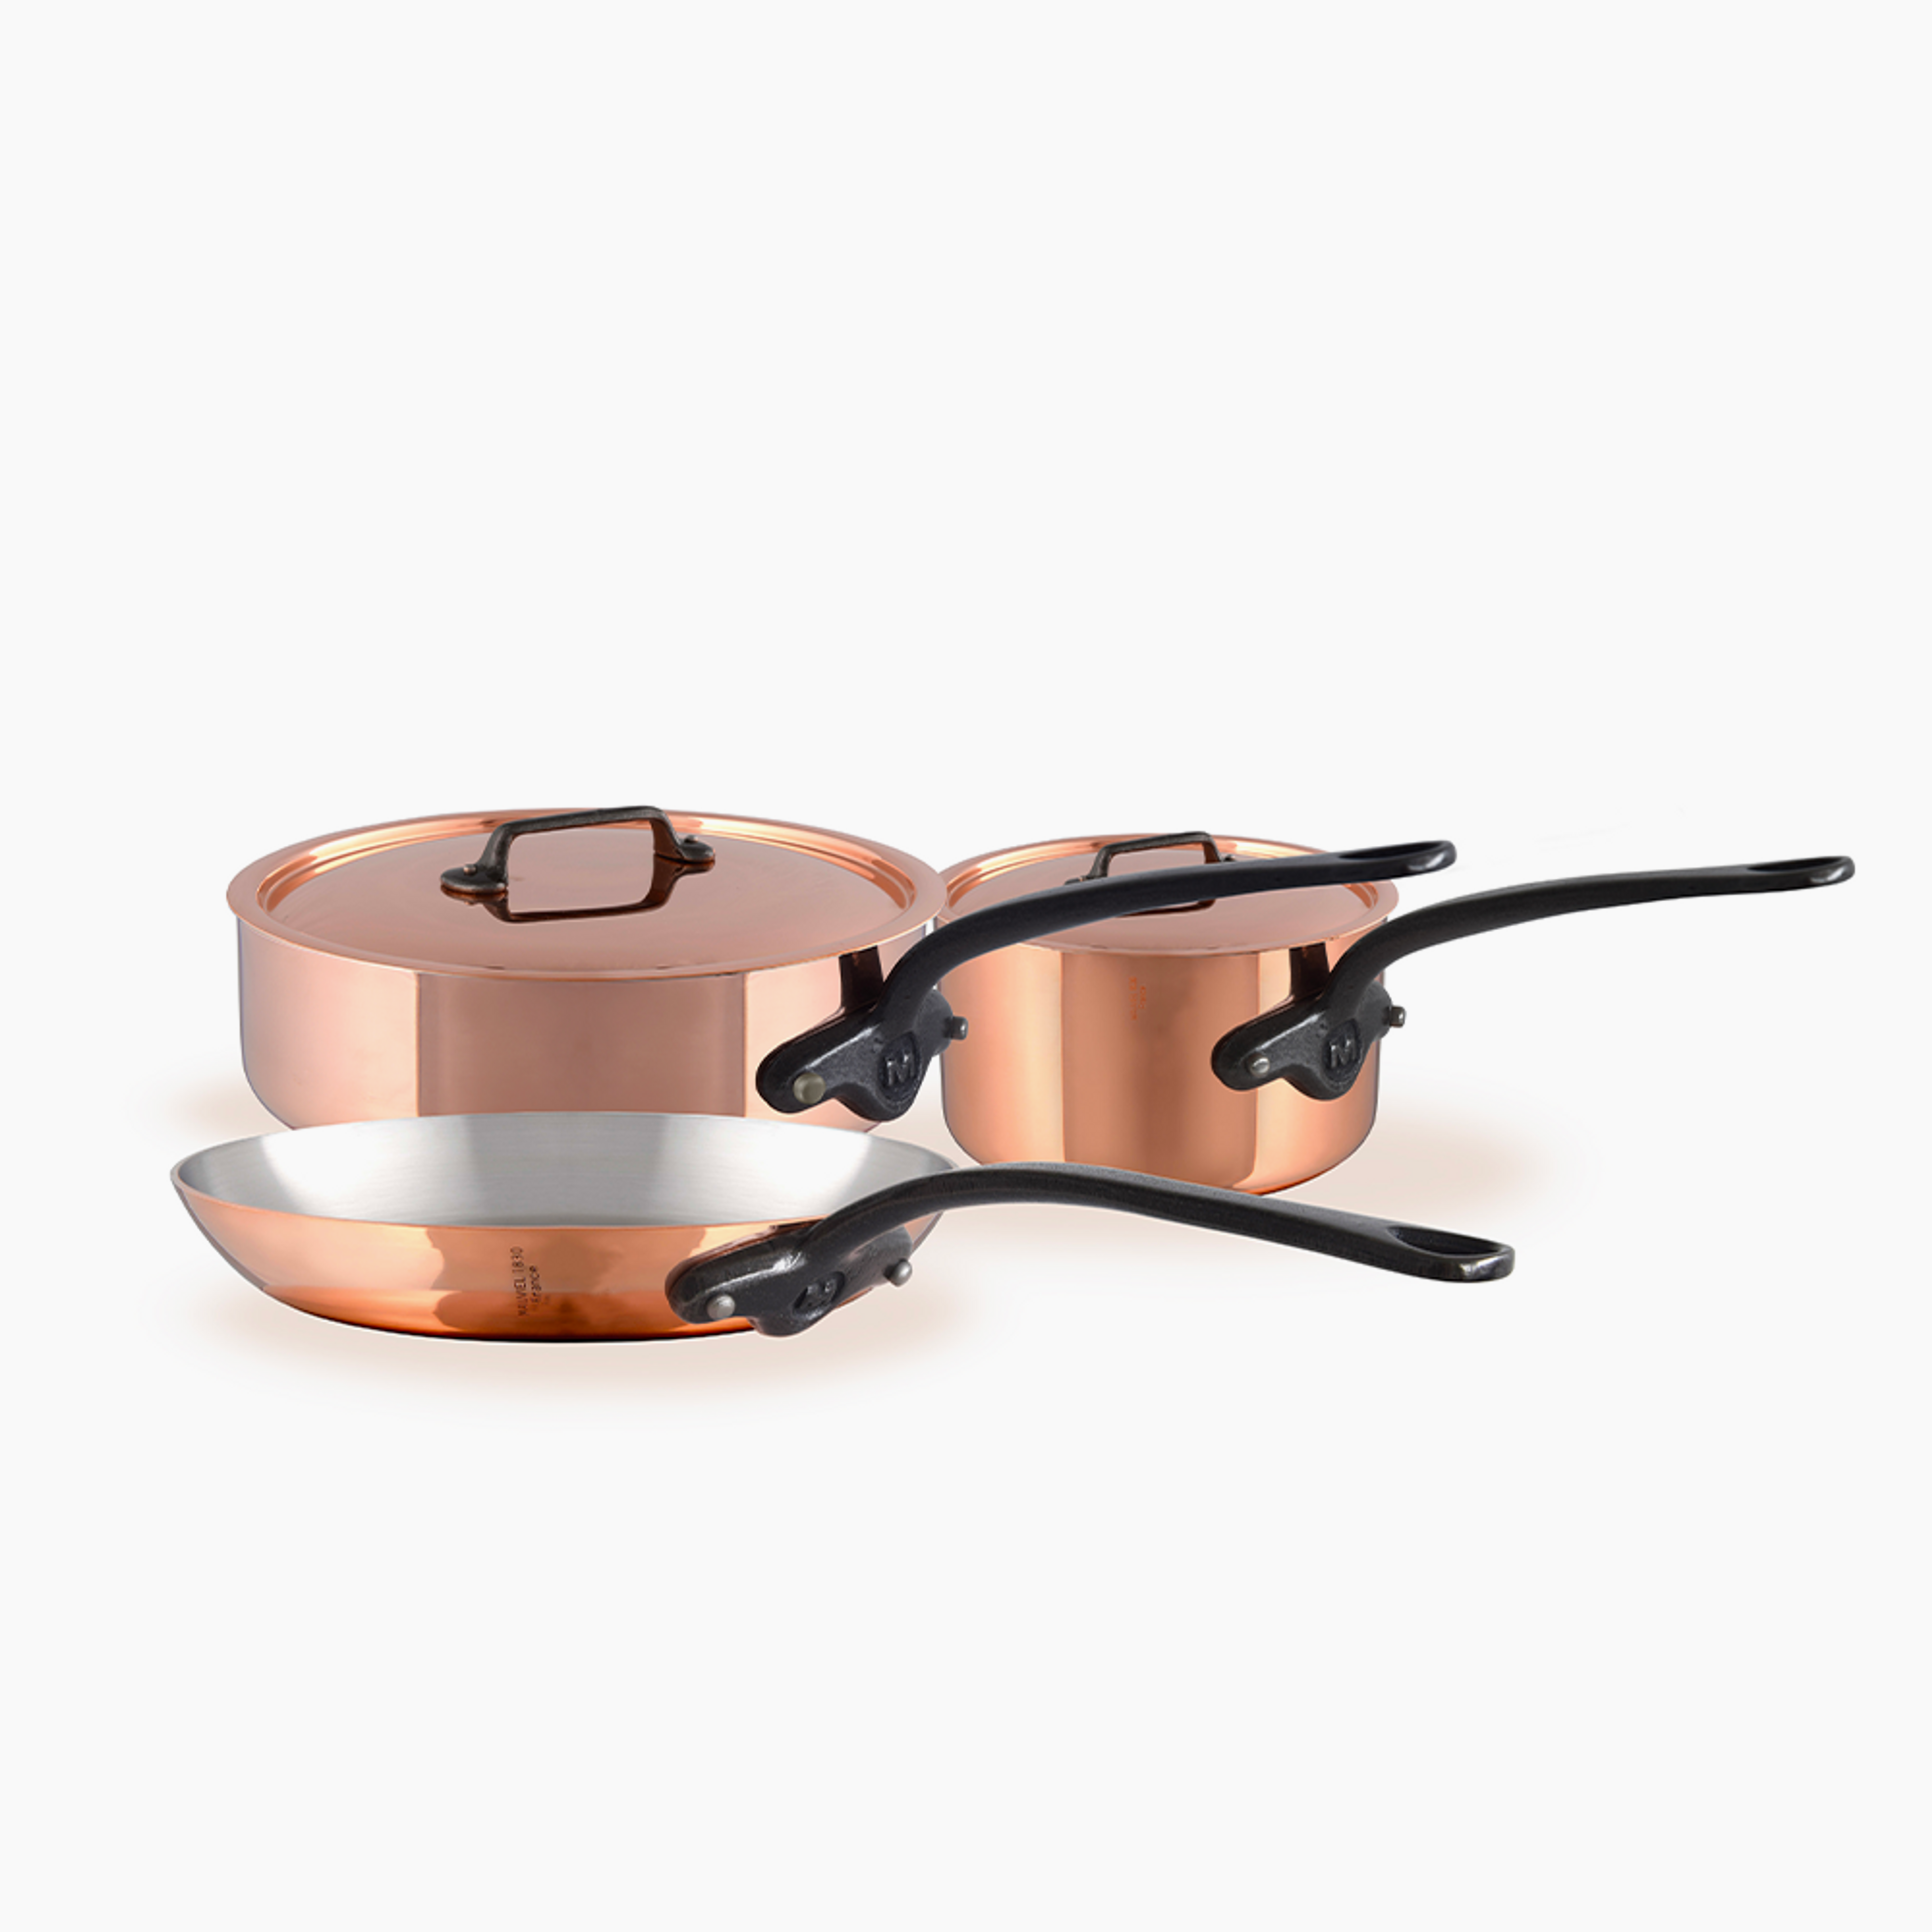 Mauviel M'Heritage 200 Ci 5-Piece Copper Cookware Set With Cast Iron Handles